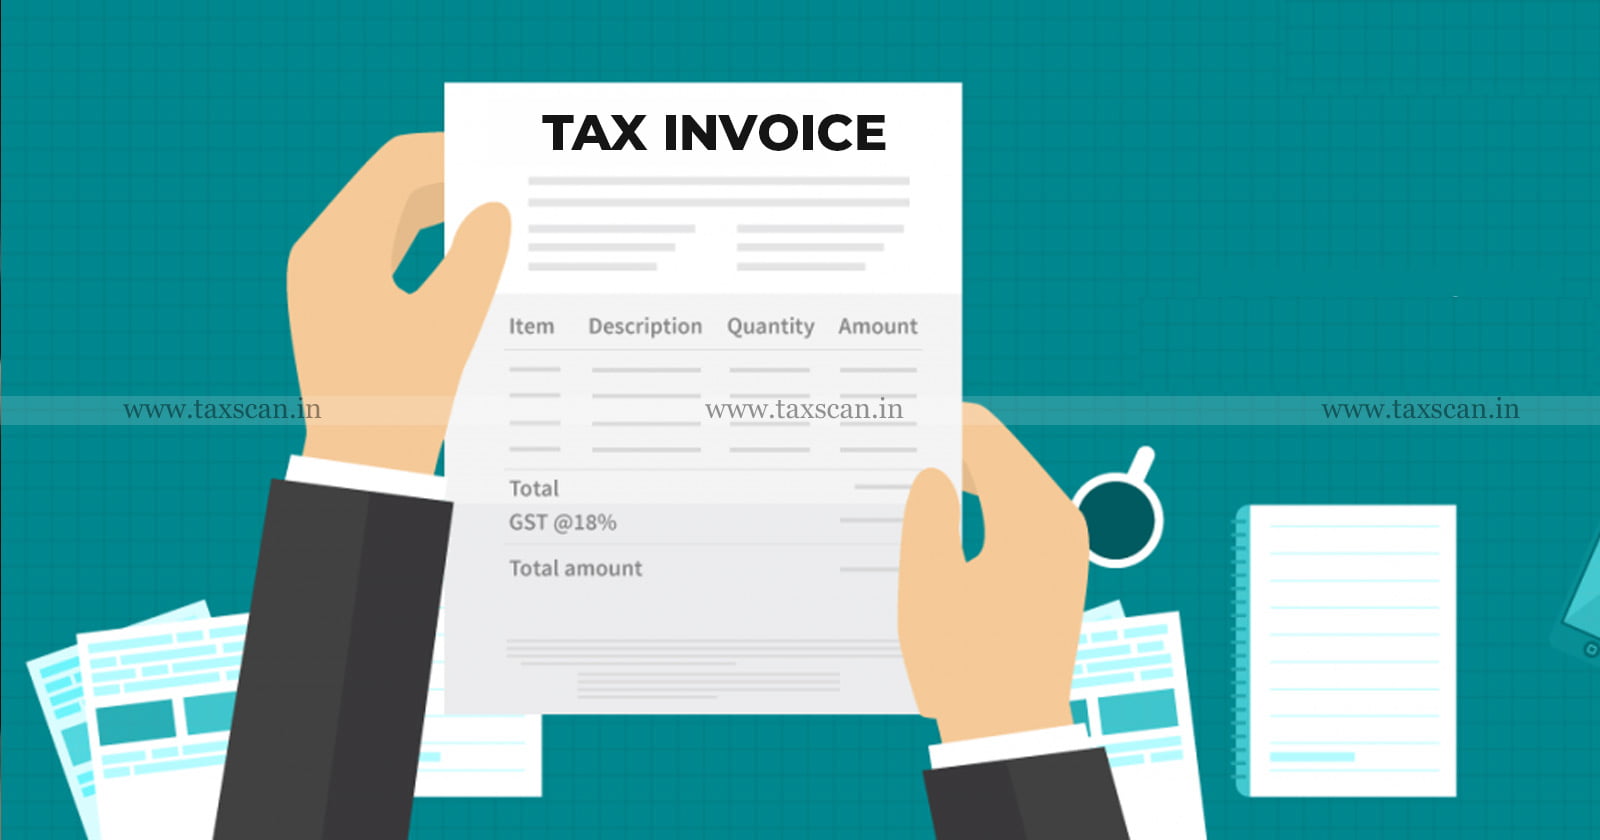 Tax Invoice - Tax - Invoice - Sole Arbitrator - Arbitration Clause - Bombay High Court - taxscan